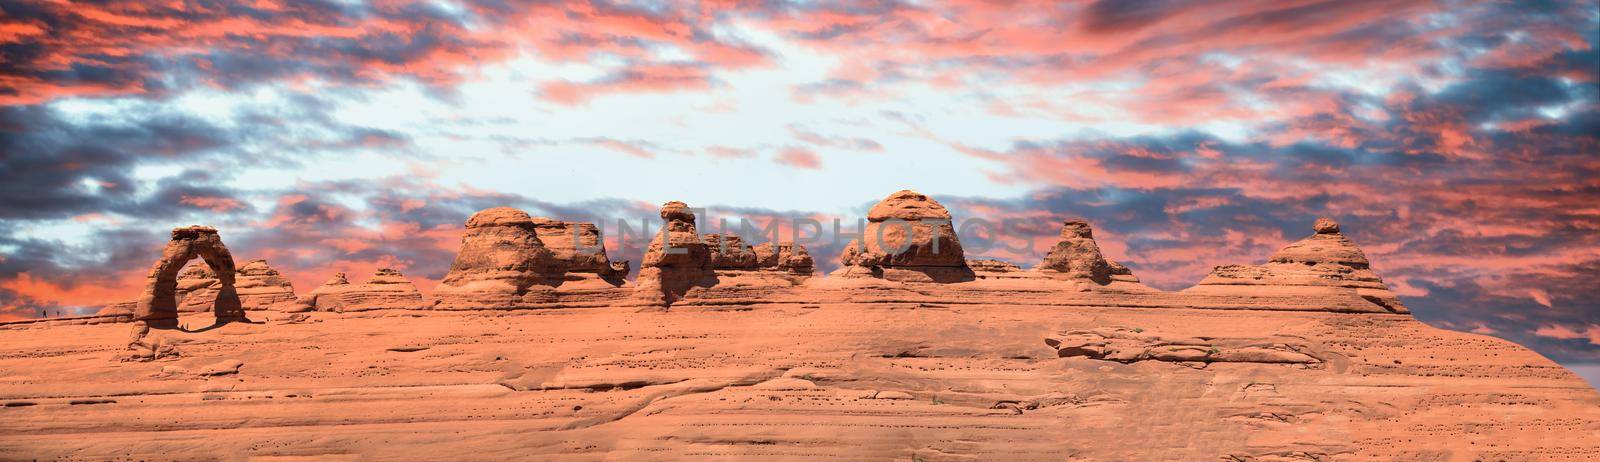 Delicate Arch panoramic view, Arches National Park. High resolution image of rock formations at sunset by jovannig